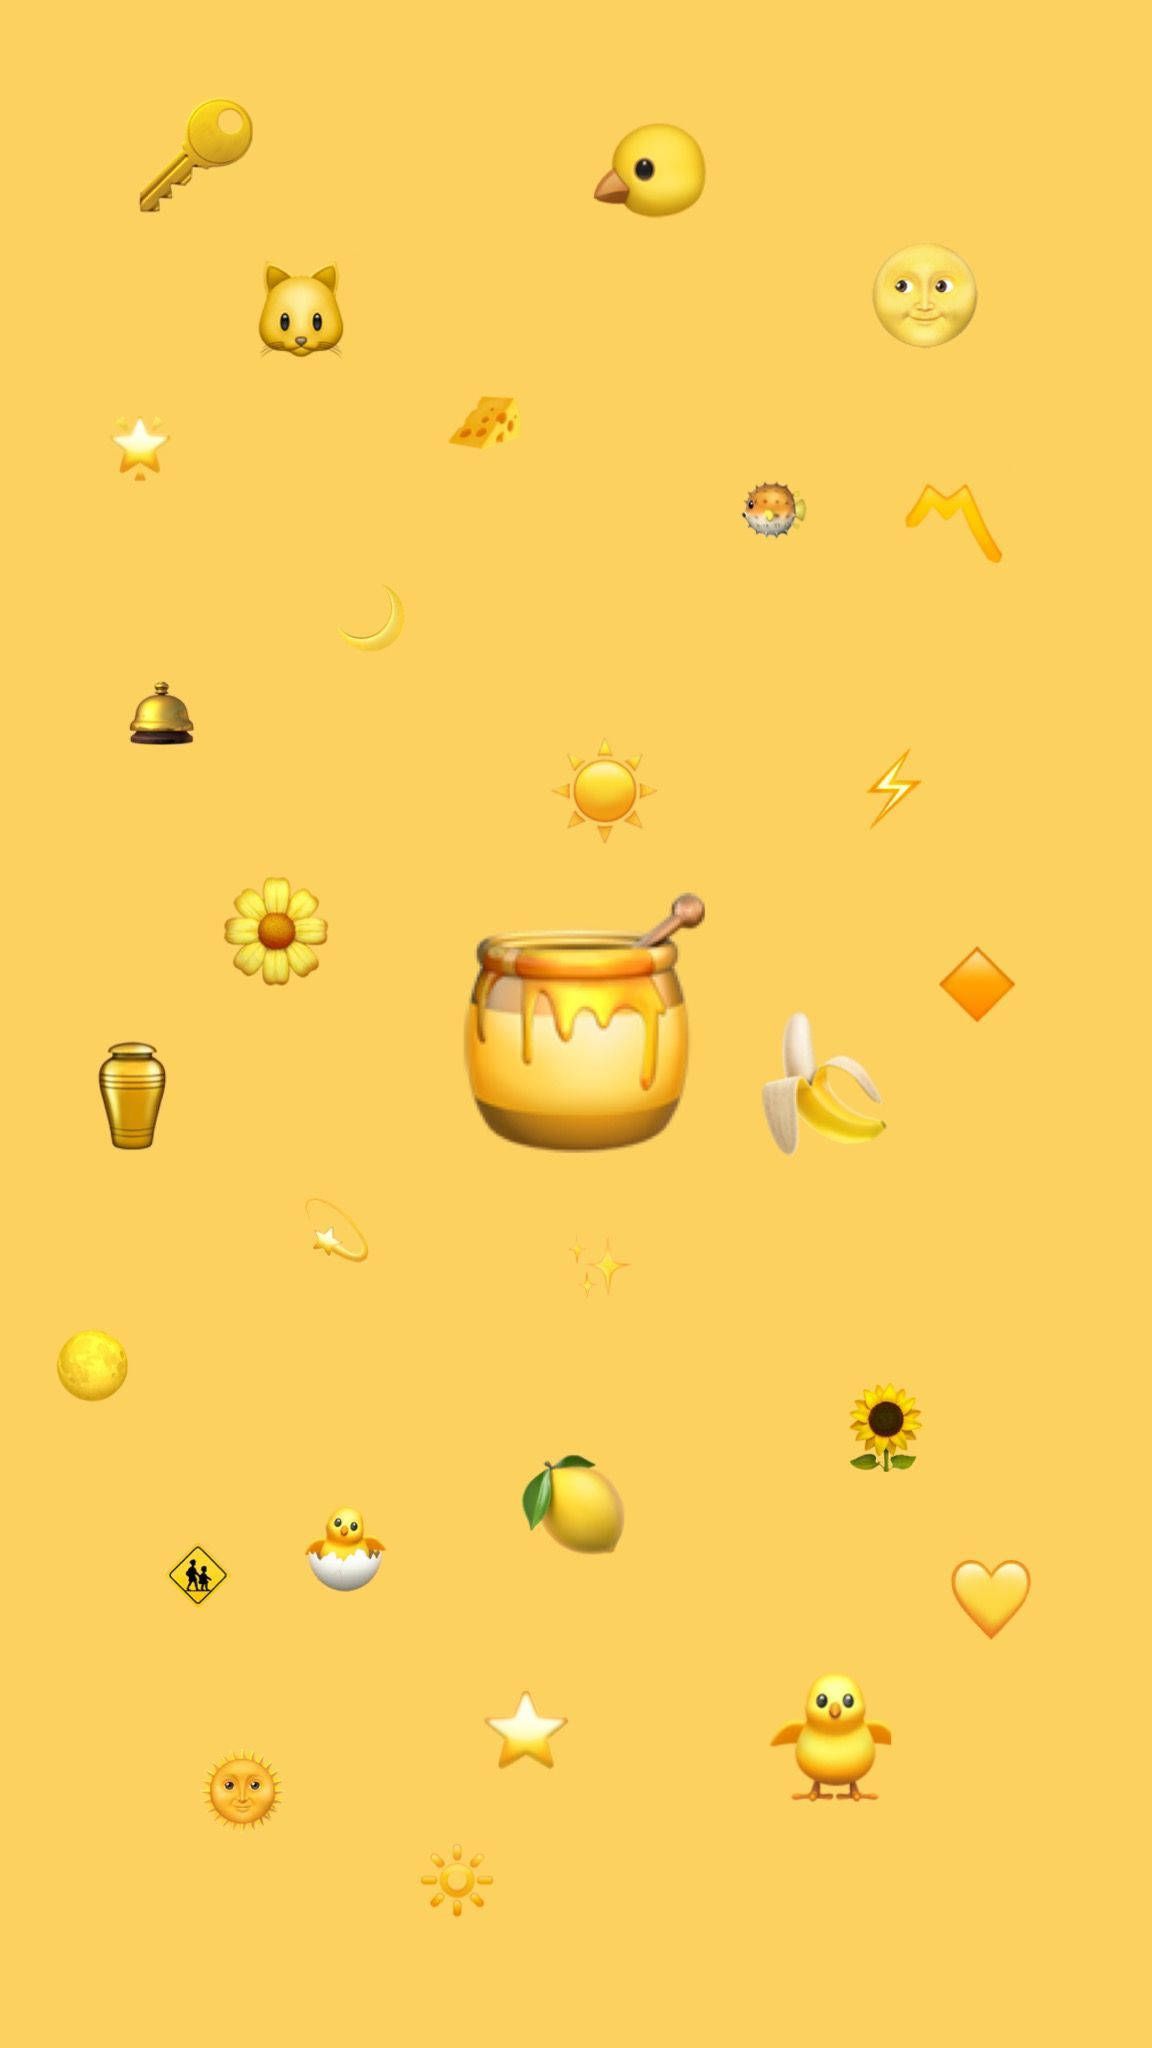 A yellow background with various round objects - Emoji